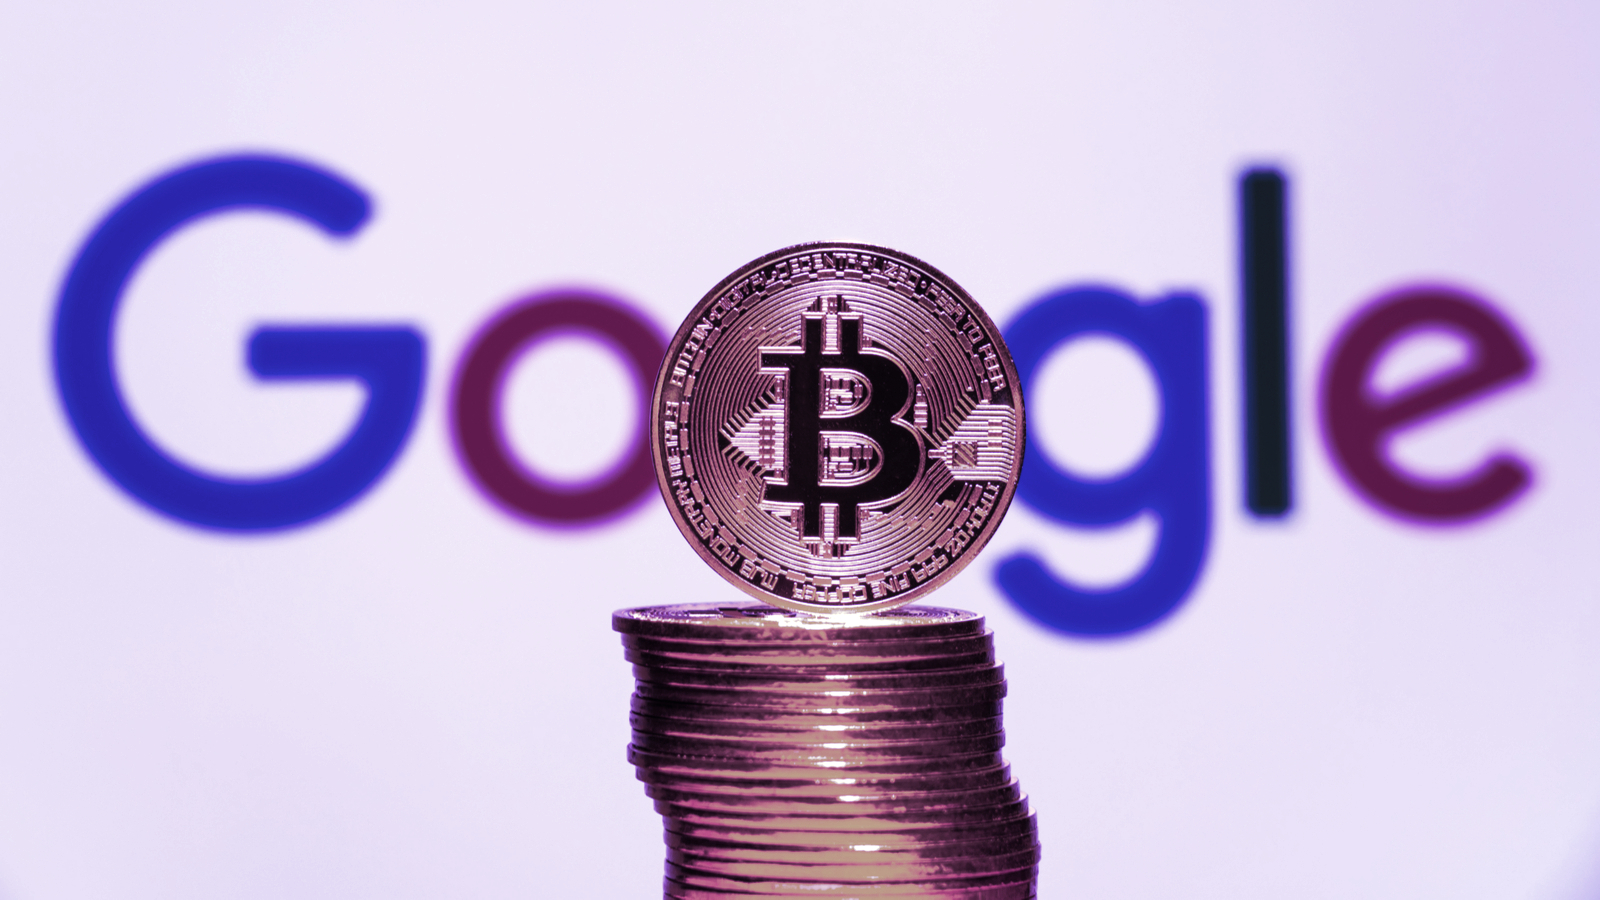 Hackers Are Breaking into Cloud Accounts to Mine Crypto: Google